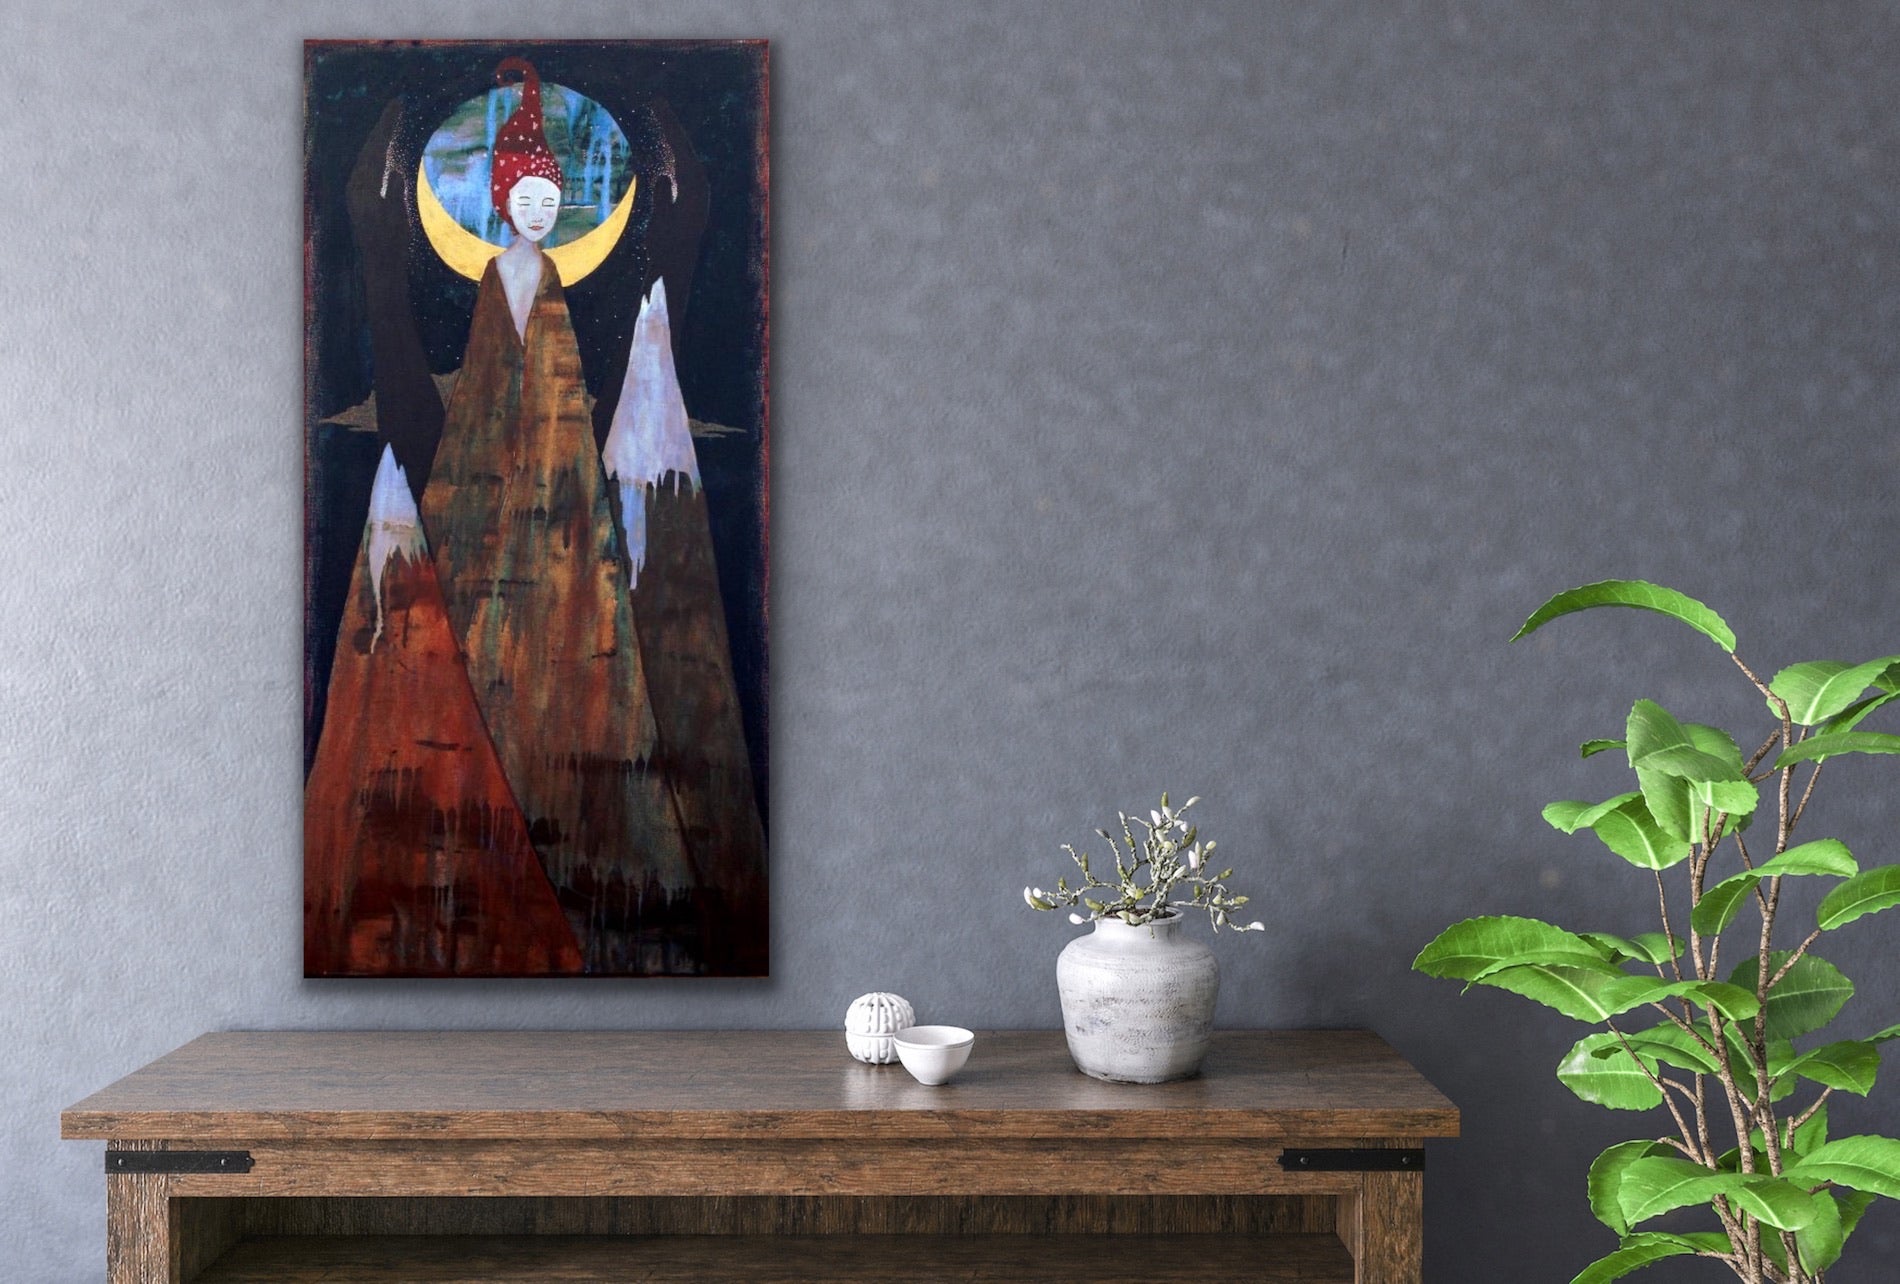 cosmic artwork depicting a woman formed from the top of a mountain. the painting is hanging on a gray wall above a wooden table with a plant and 3 white objects